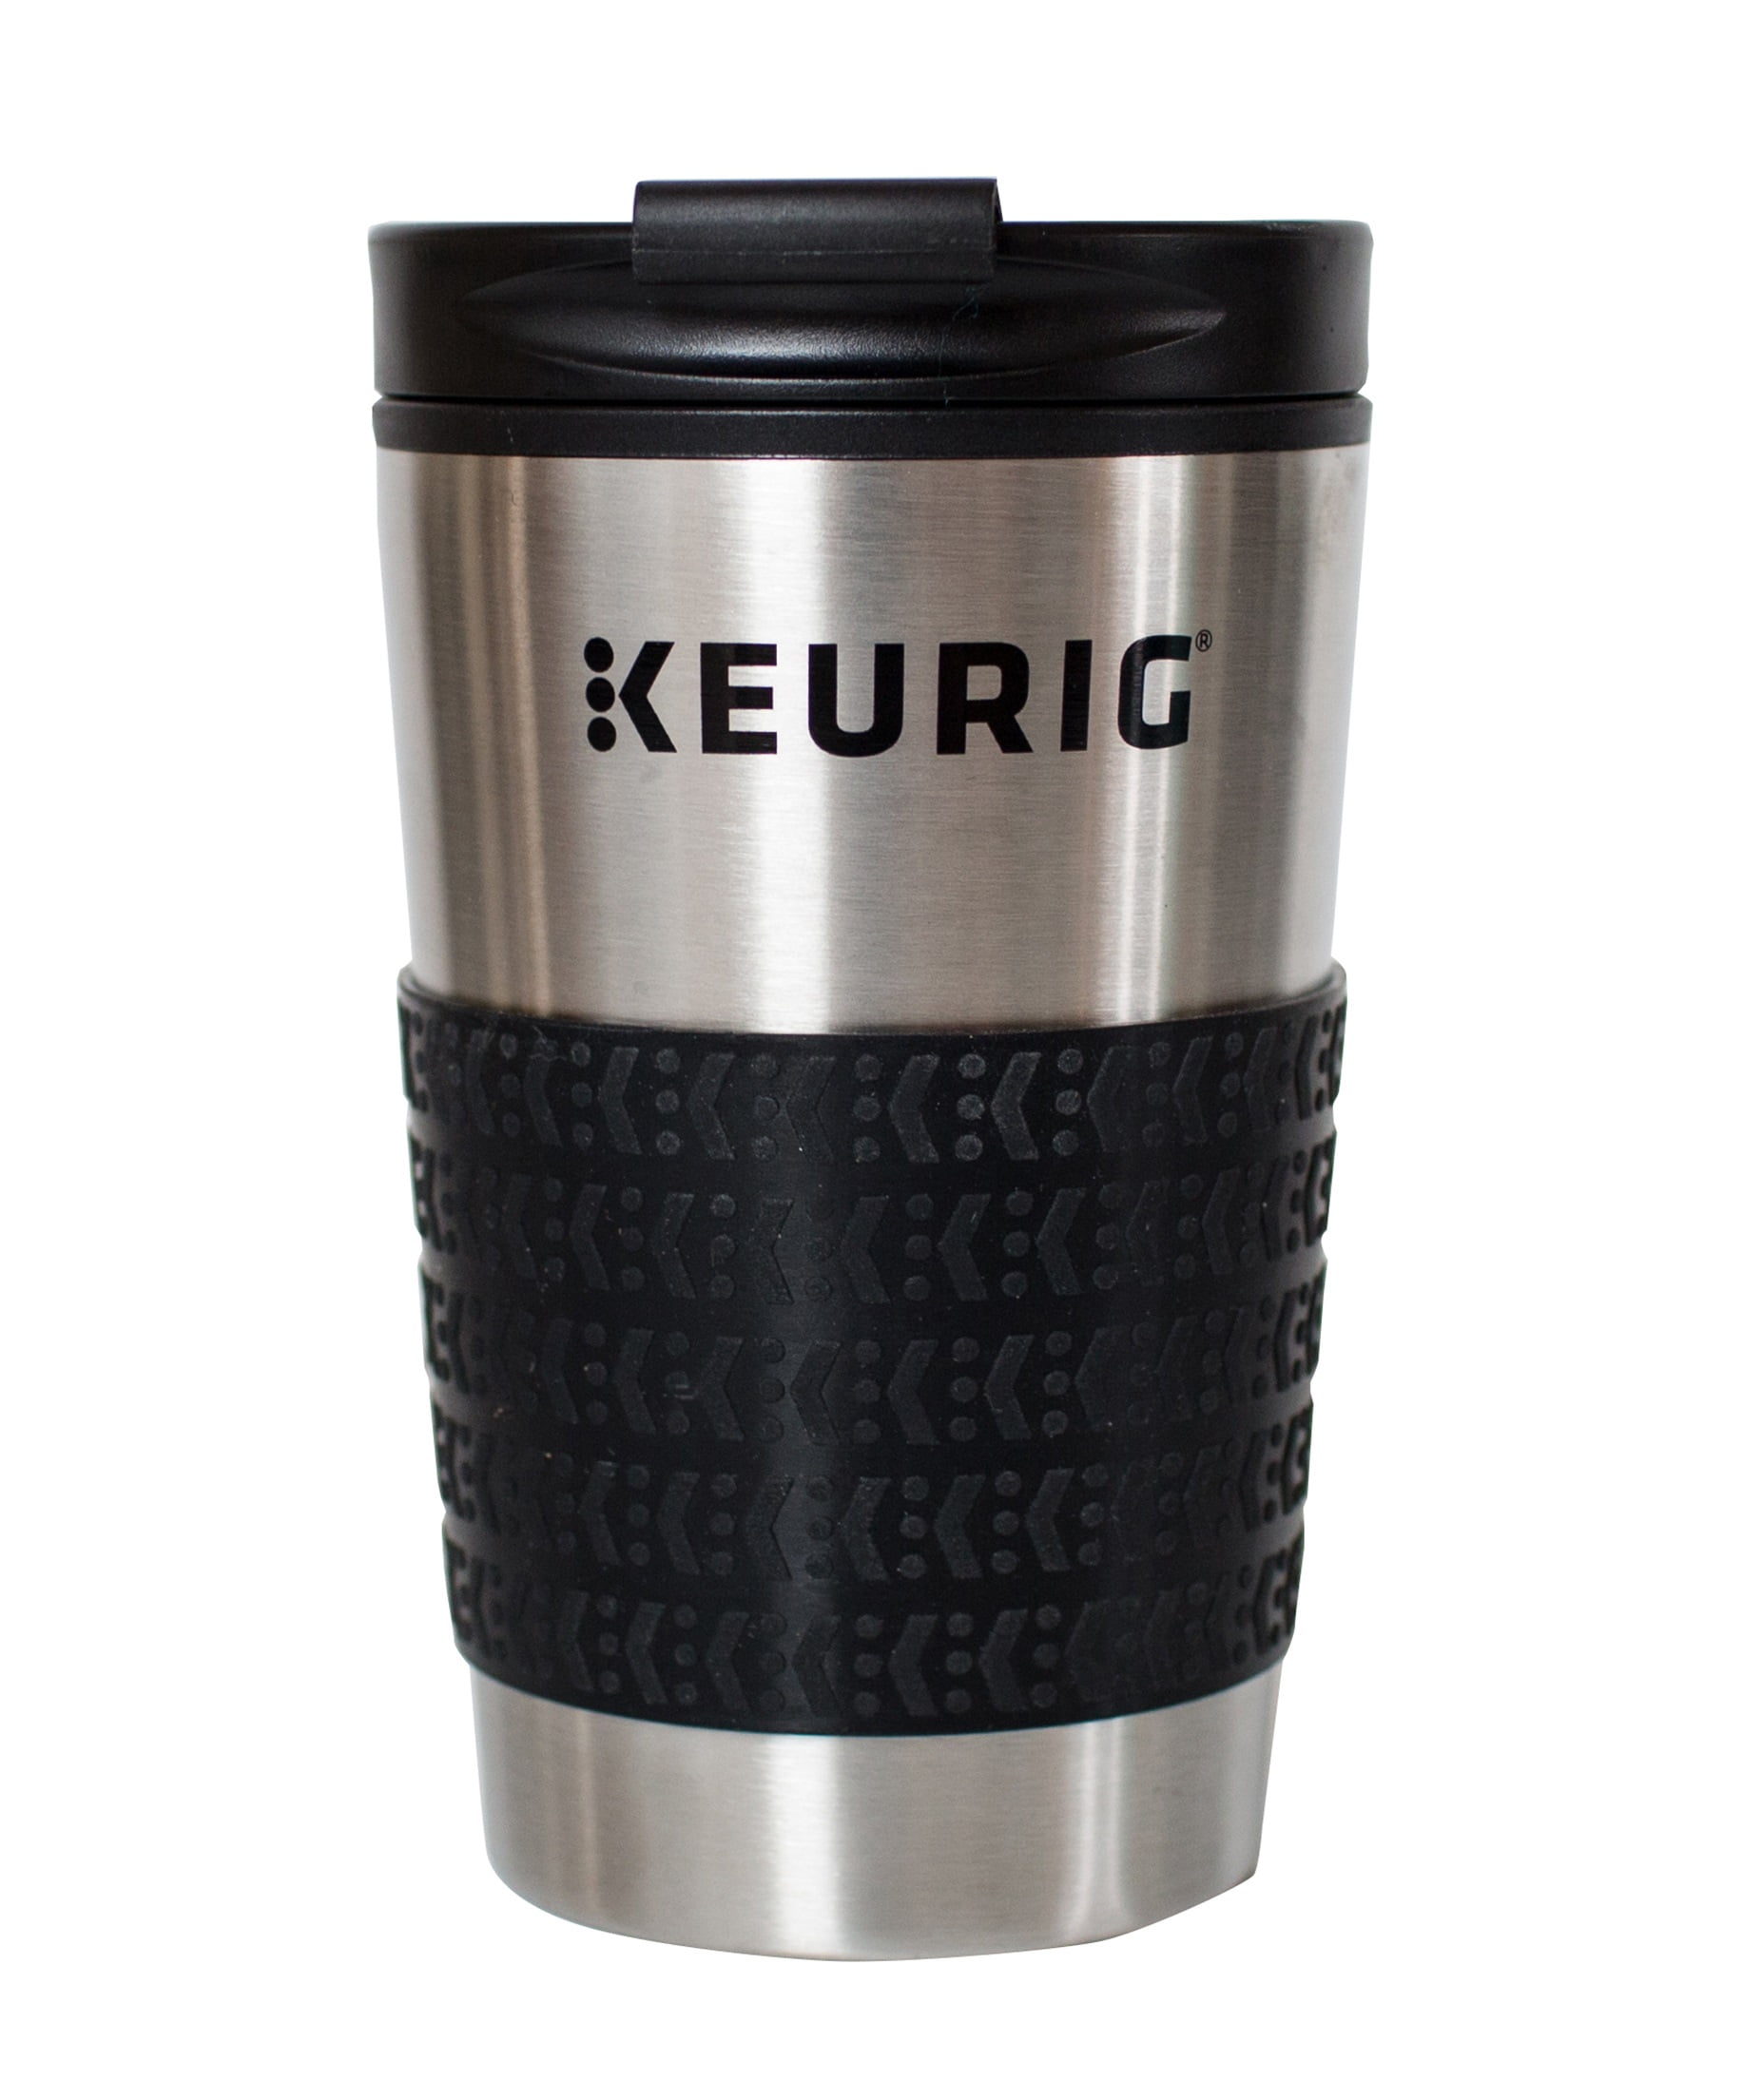  Keurig Travel Mug Fits K-Cup Pod Coffee Maker, 1 Count (Pack of  1), Stainless Steel: Home & Kitchen